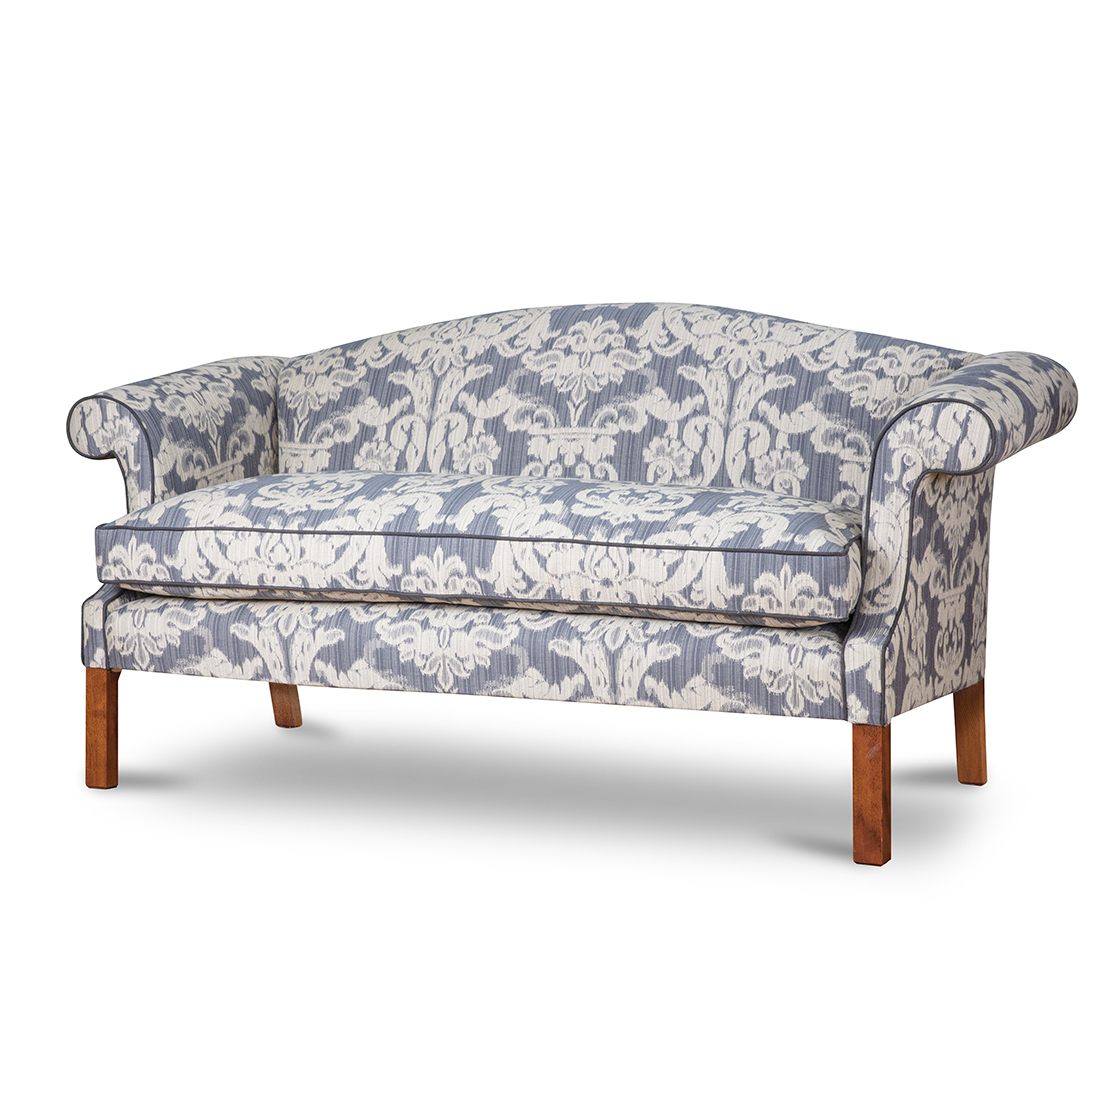 Congreve sofa 2s in Wicklow damask - Pewter - Beaumont & Fletcher